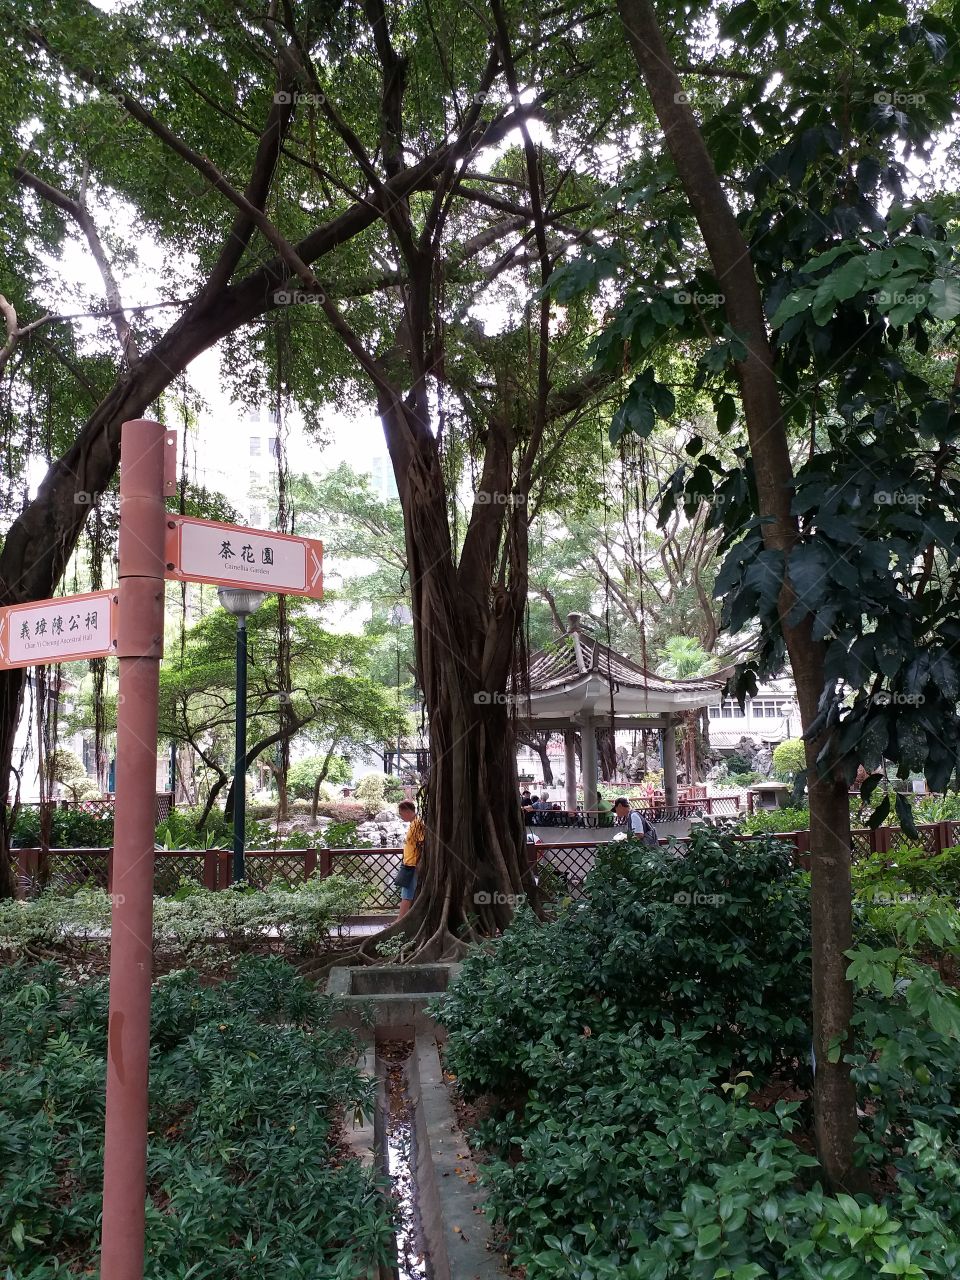 signpost in a HK urban park